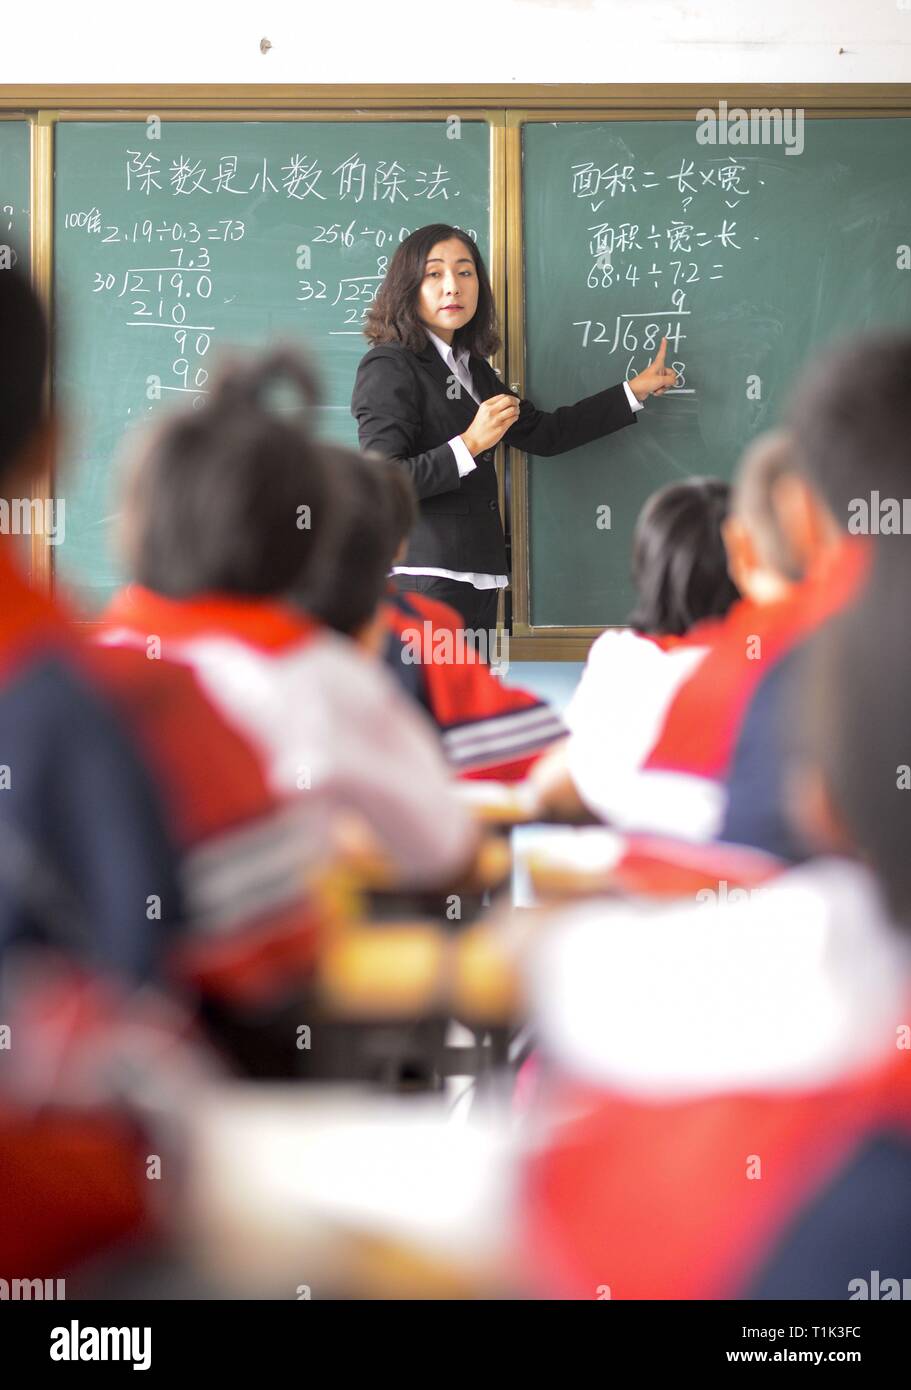 (190327) -- BEIJING, March 27, 2019 (Xinhua) -- A teacher gives a lesson to students at the central primary school of Tuokezhake Township in Shufu County, northwest China's Xinjiang Uygur Autonomous Region, Sept. 26, 2017. China's efforts to promote the 'balanced development' of compulsory education, which usually means narrowing inter-regional, rural-urban or inter-school gaps in terms of education conditions and quality, has borne fruit, the Ministry of Education said Tuesday.     According to the ministry, the balanced development of compulsory education has been achieved in 2,717 counties, Stock Photo